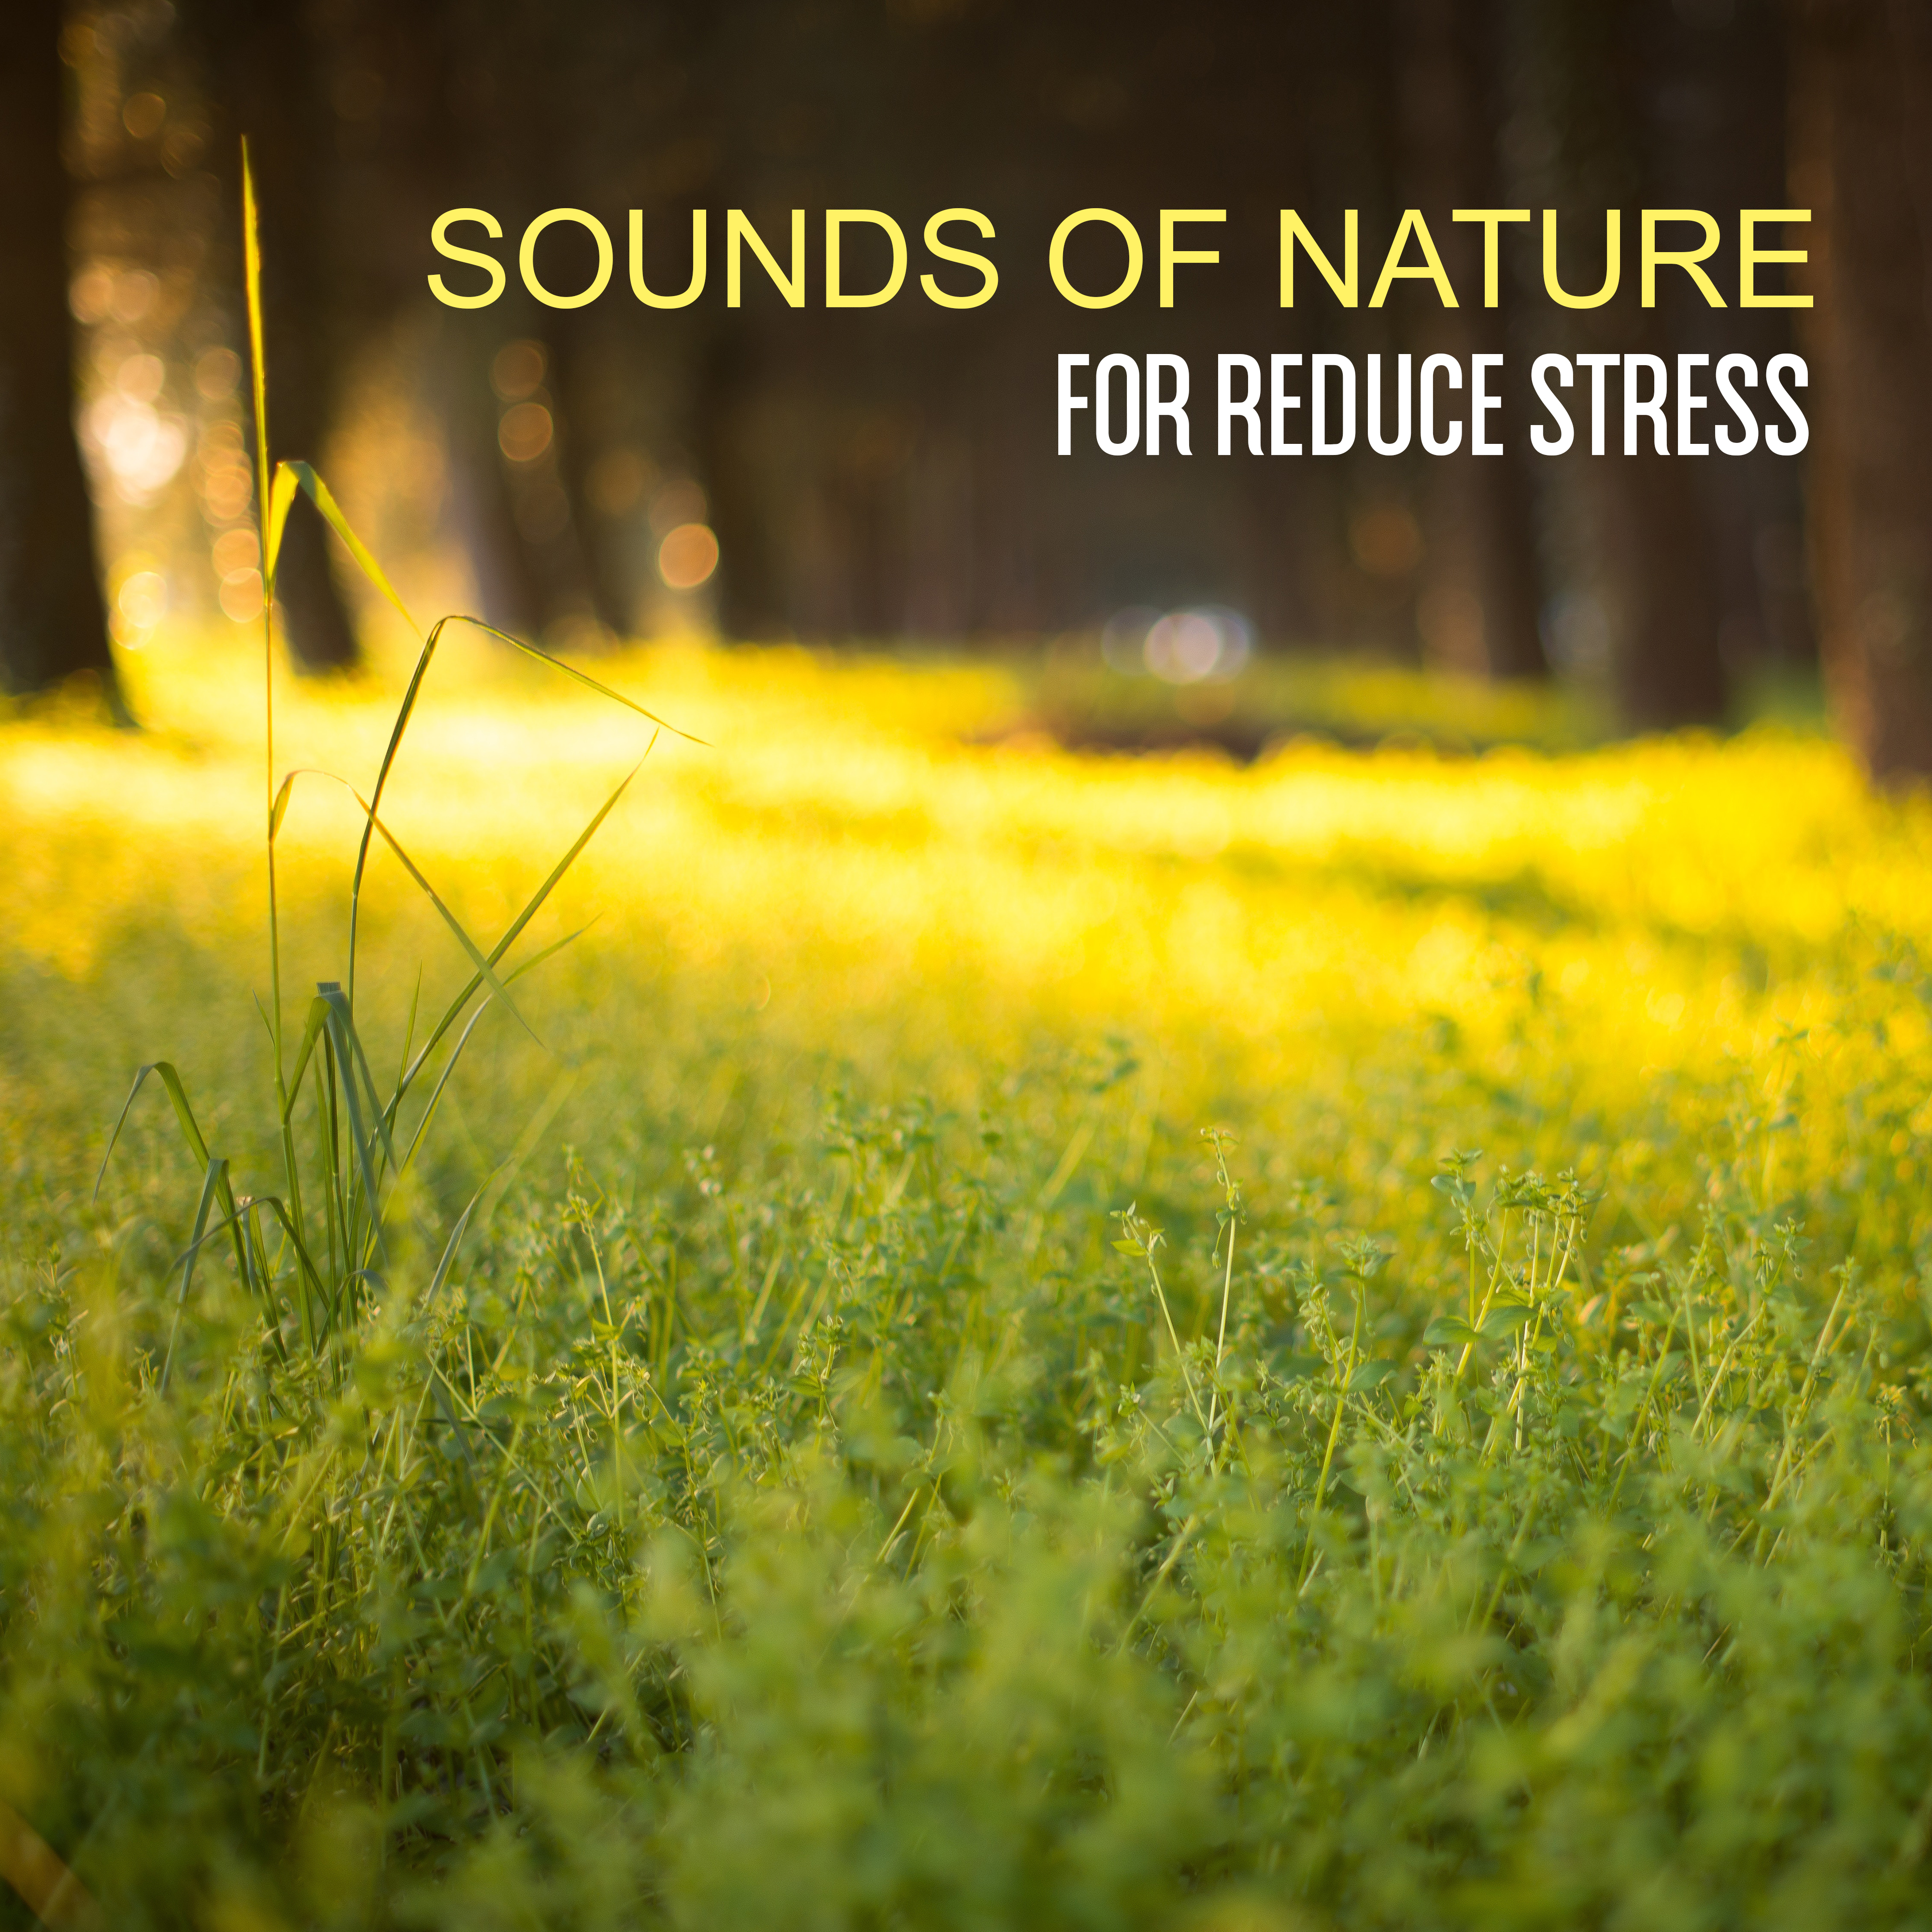 Sounds of Nature for Reduce Stress